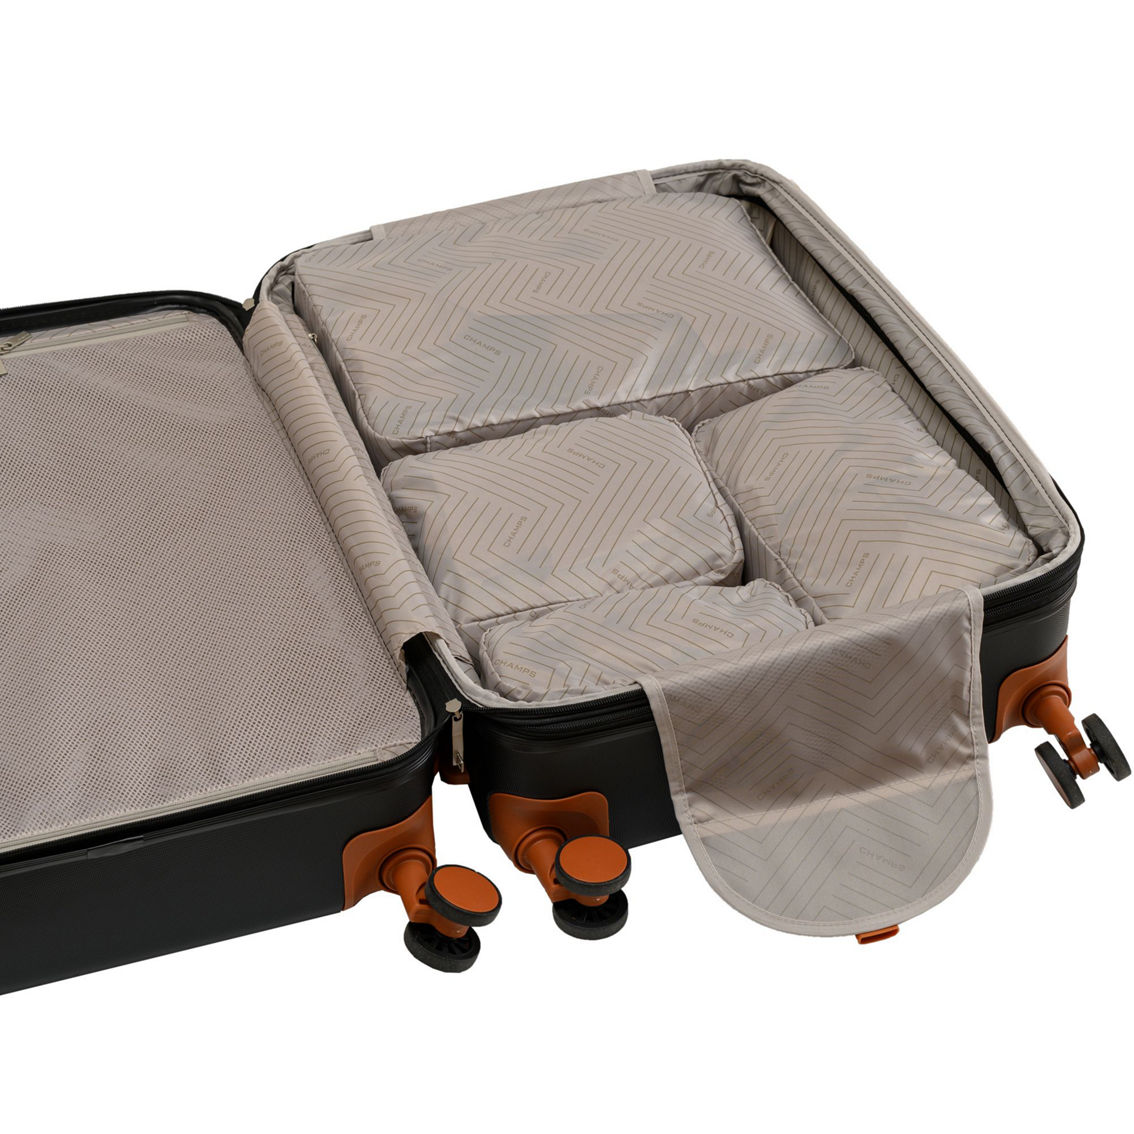 CHAMPS Packing Cubes-6 Piece Set - Image 5 of 5